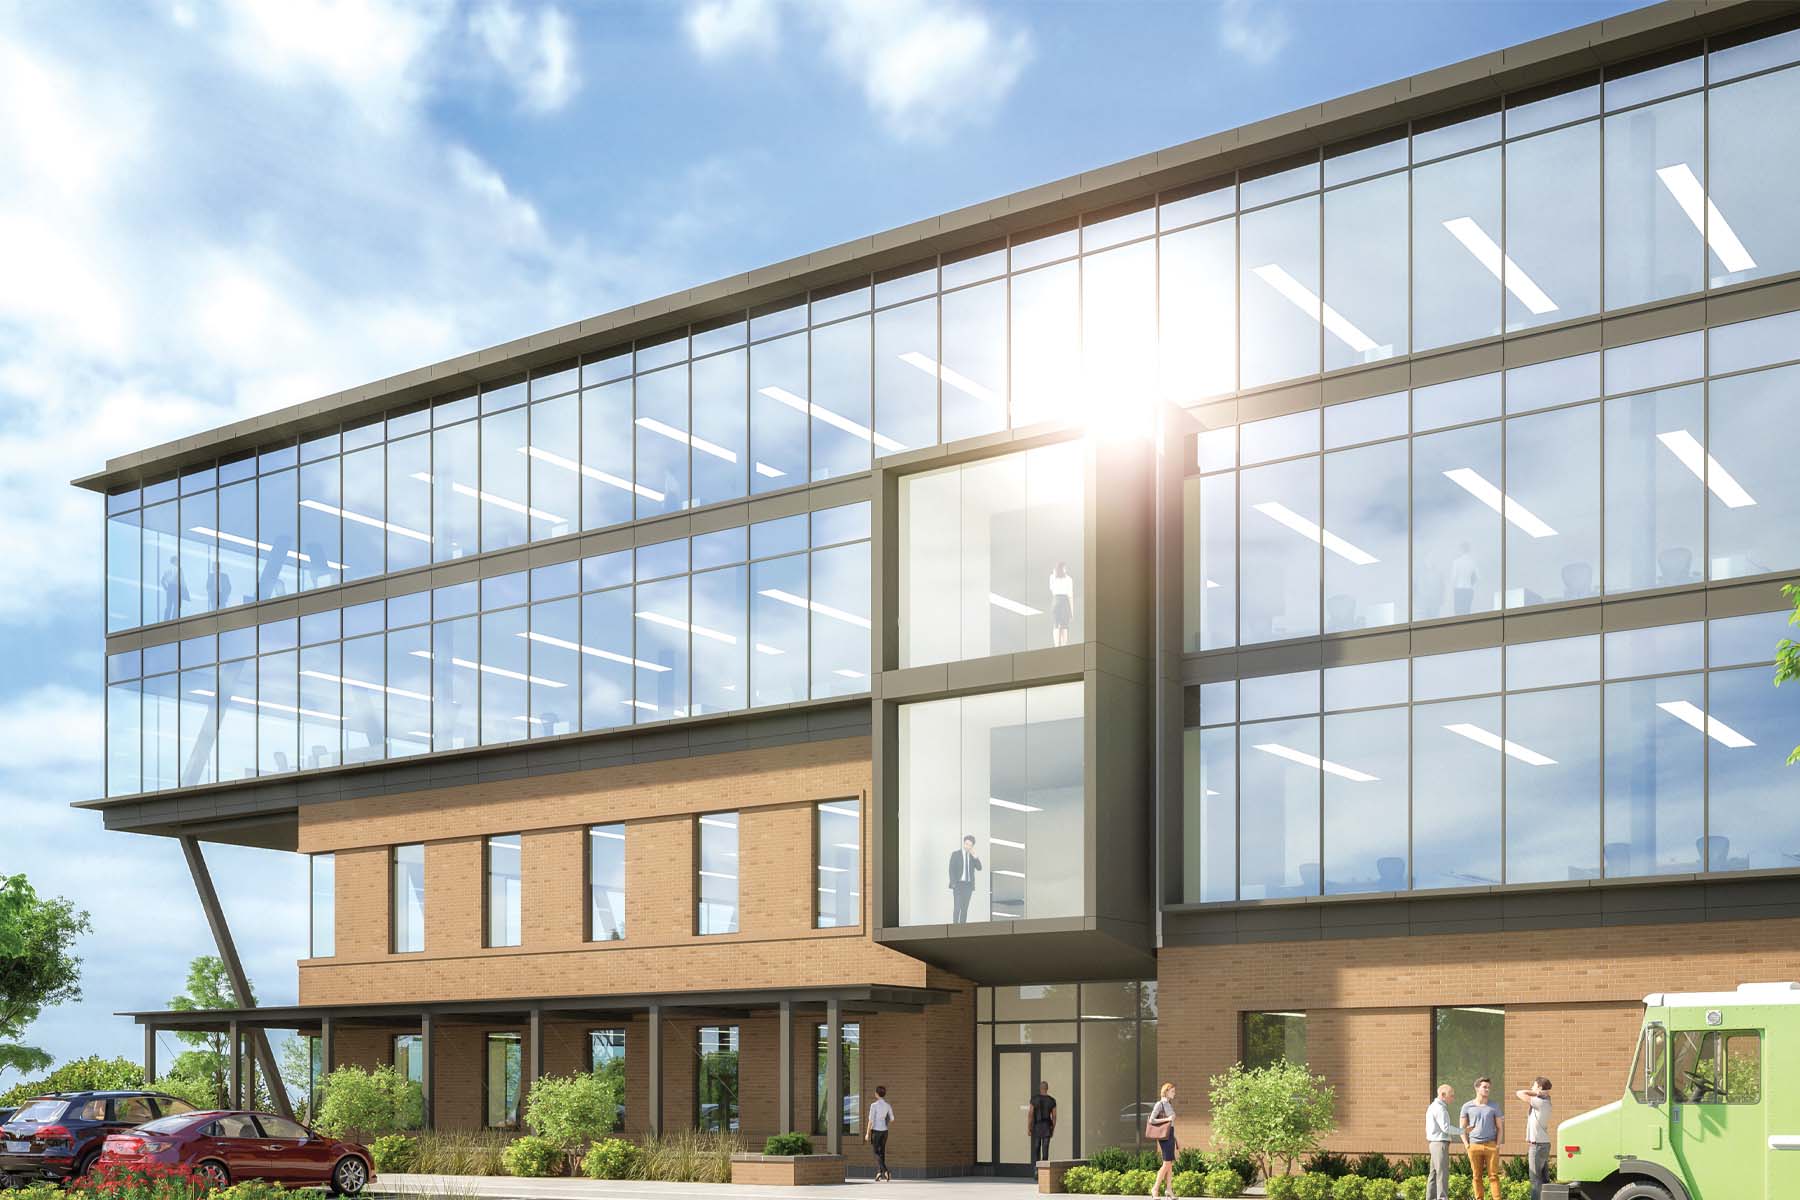 Rendering of a 4 story office building. People walking outside in the parking lot and visible from large floor to ceiling windows